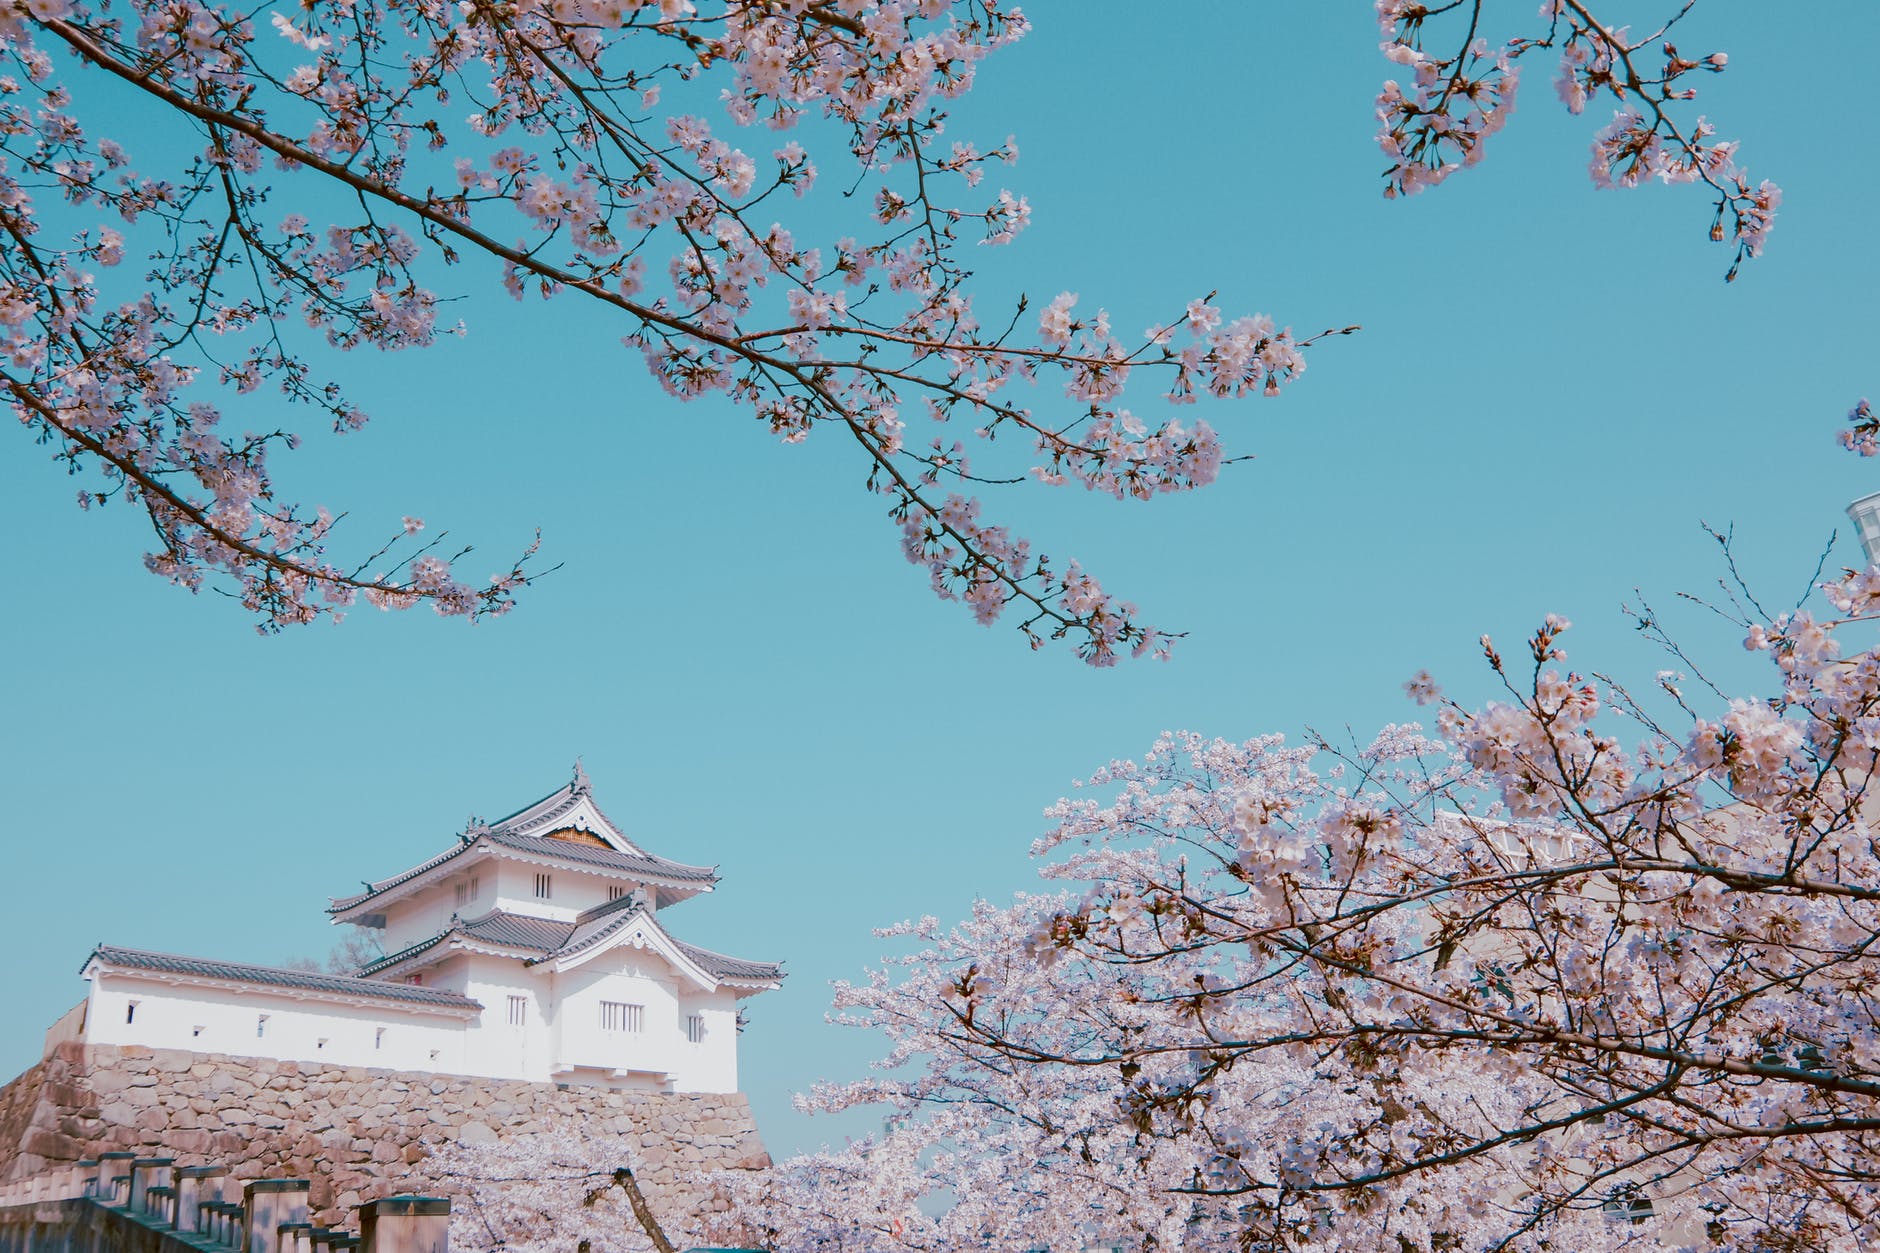 pink cherry blossoms under a clear blue sky